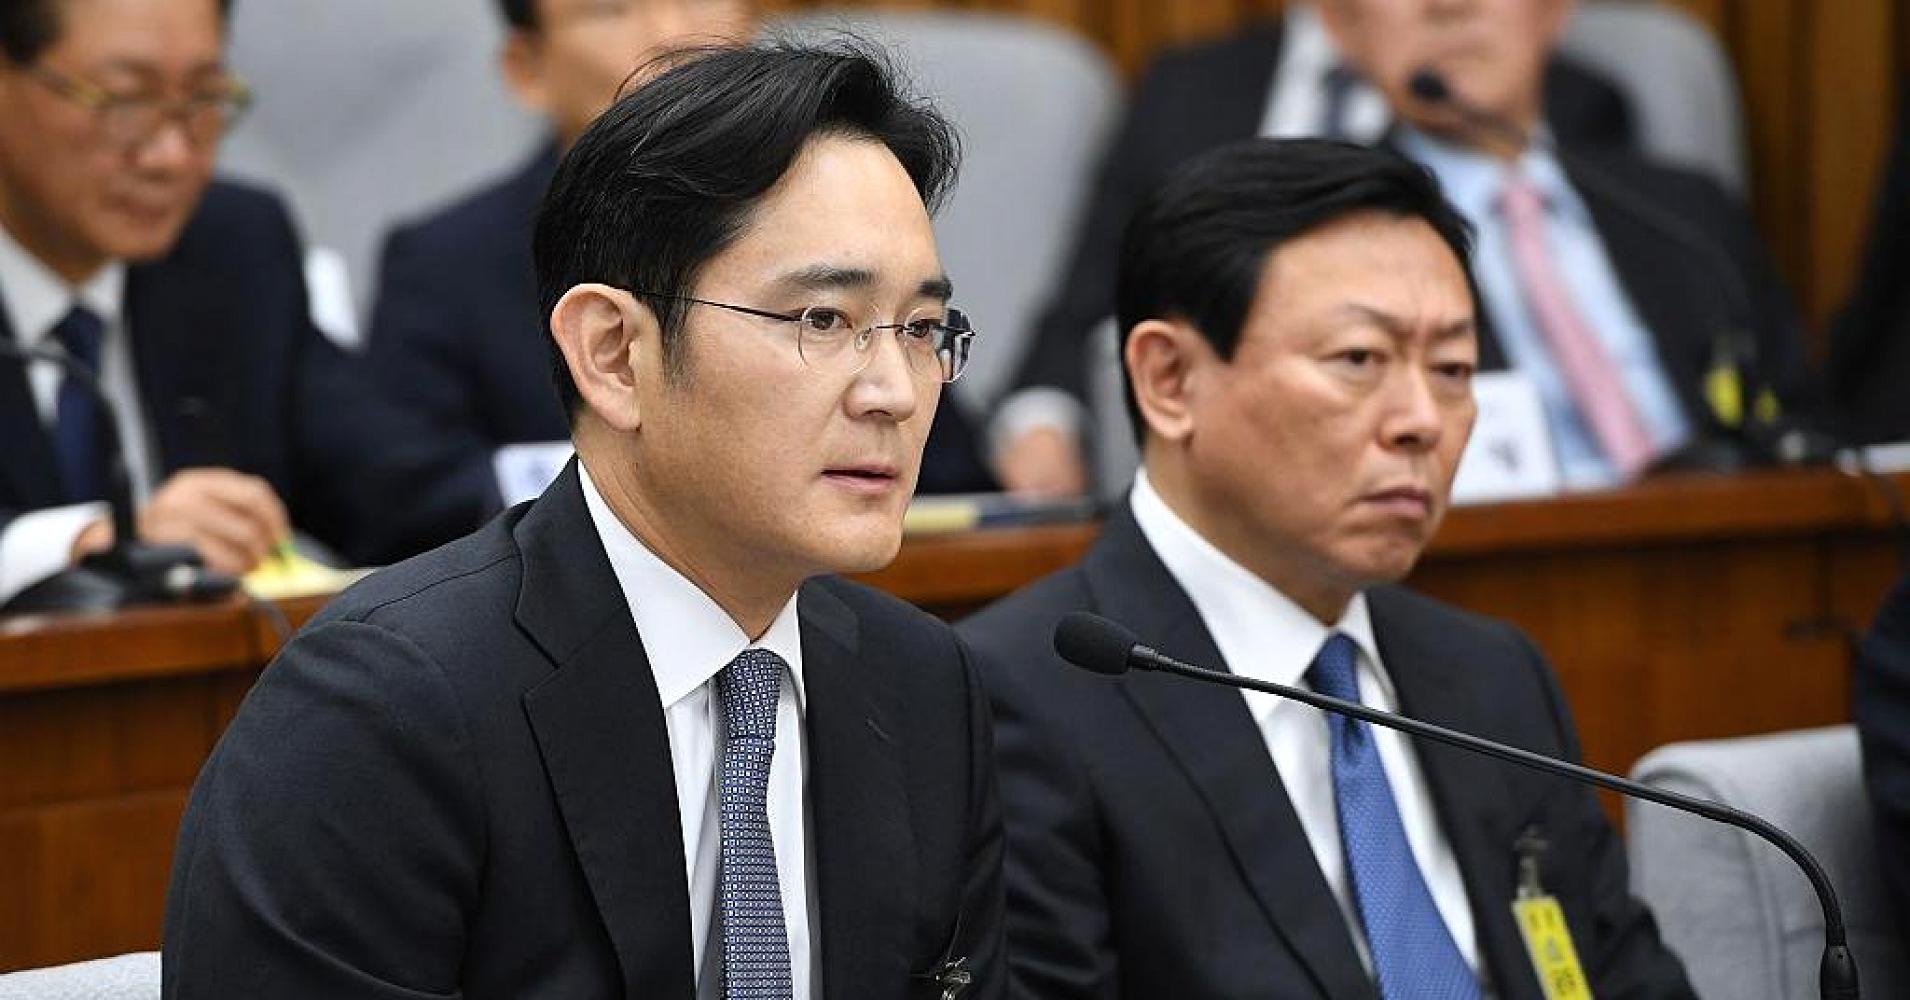 Samsung’s Lee Appears for Marathon Questioning in Bribery Probe